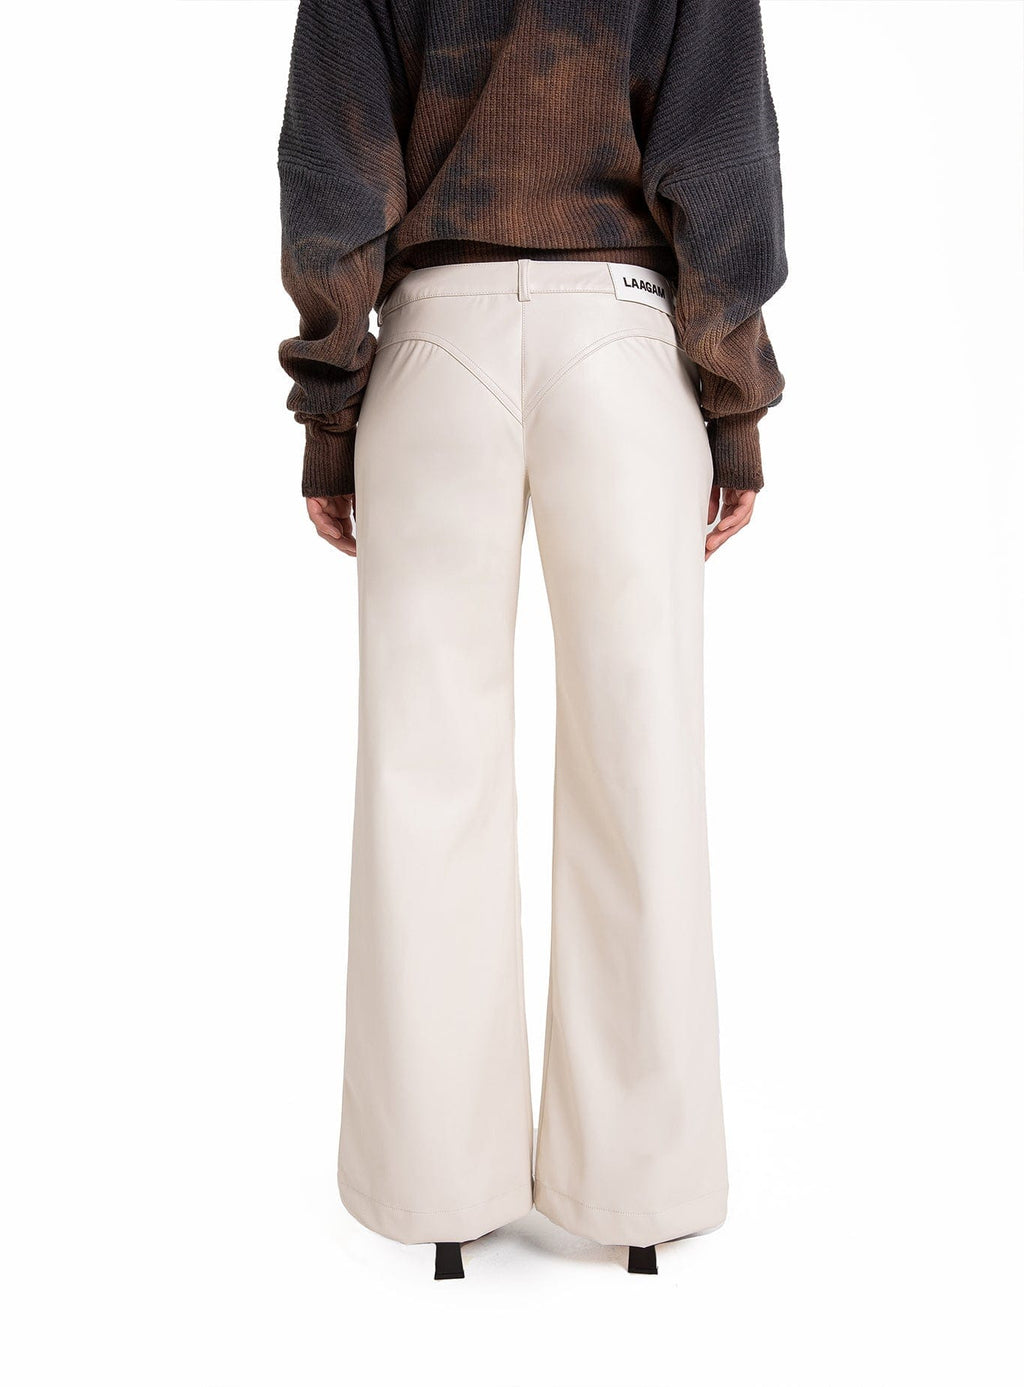 HARLOW WHITE FAUX LEATHER PANTS